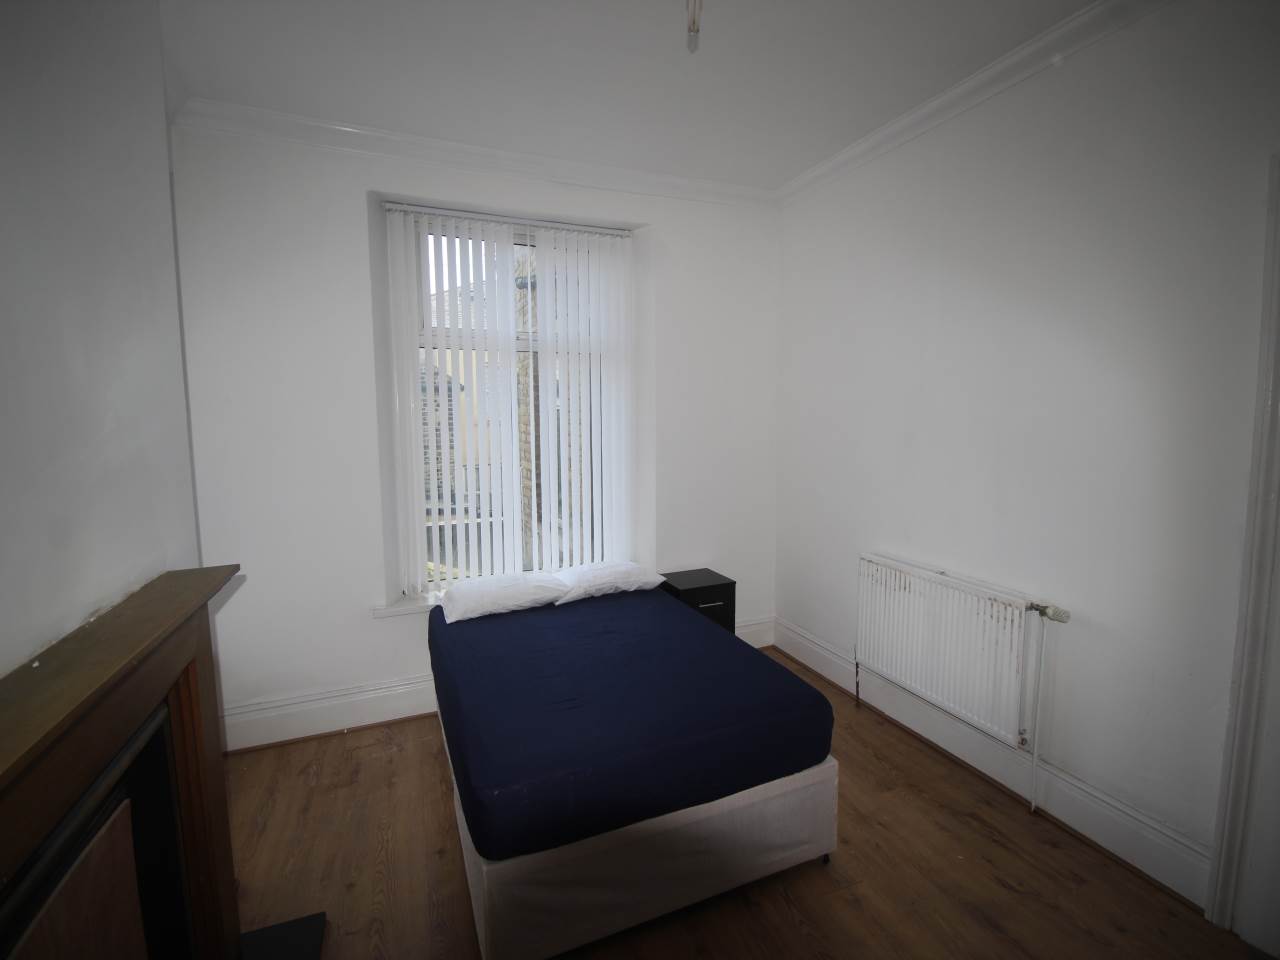 1 bed house / flat share to rent in Little Horton Lane  - Property Image 3